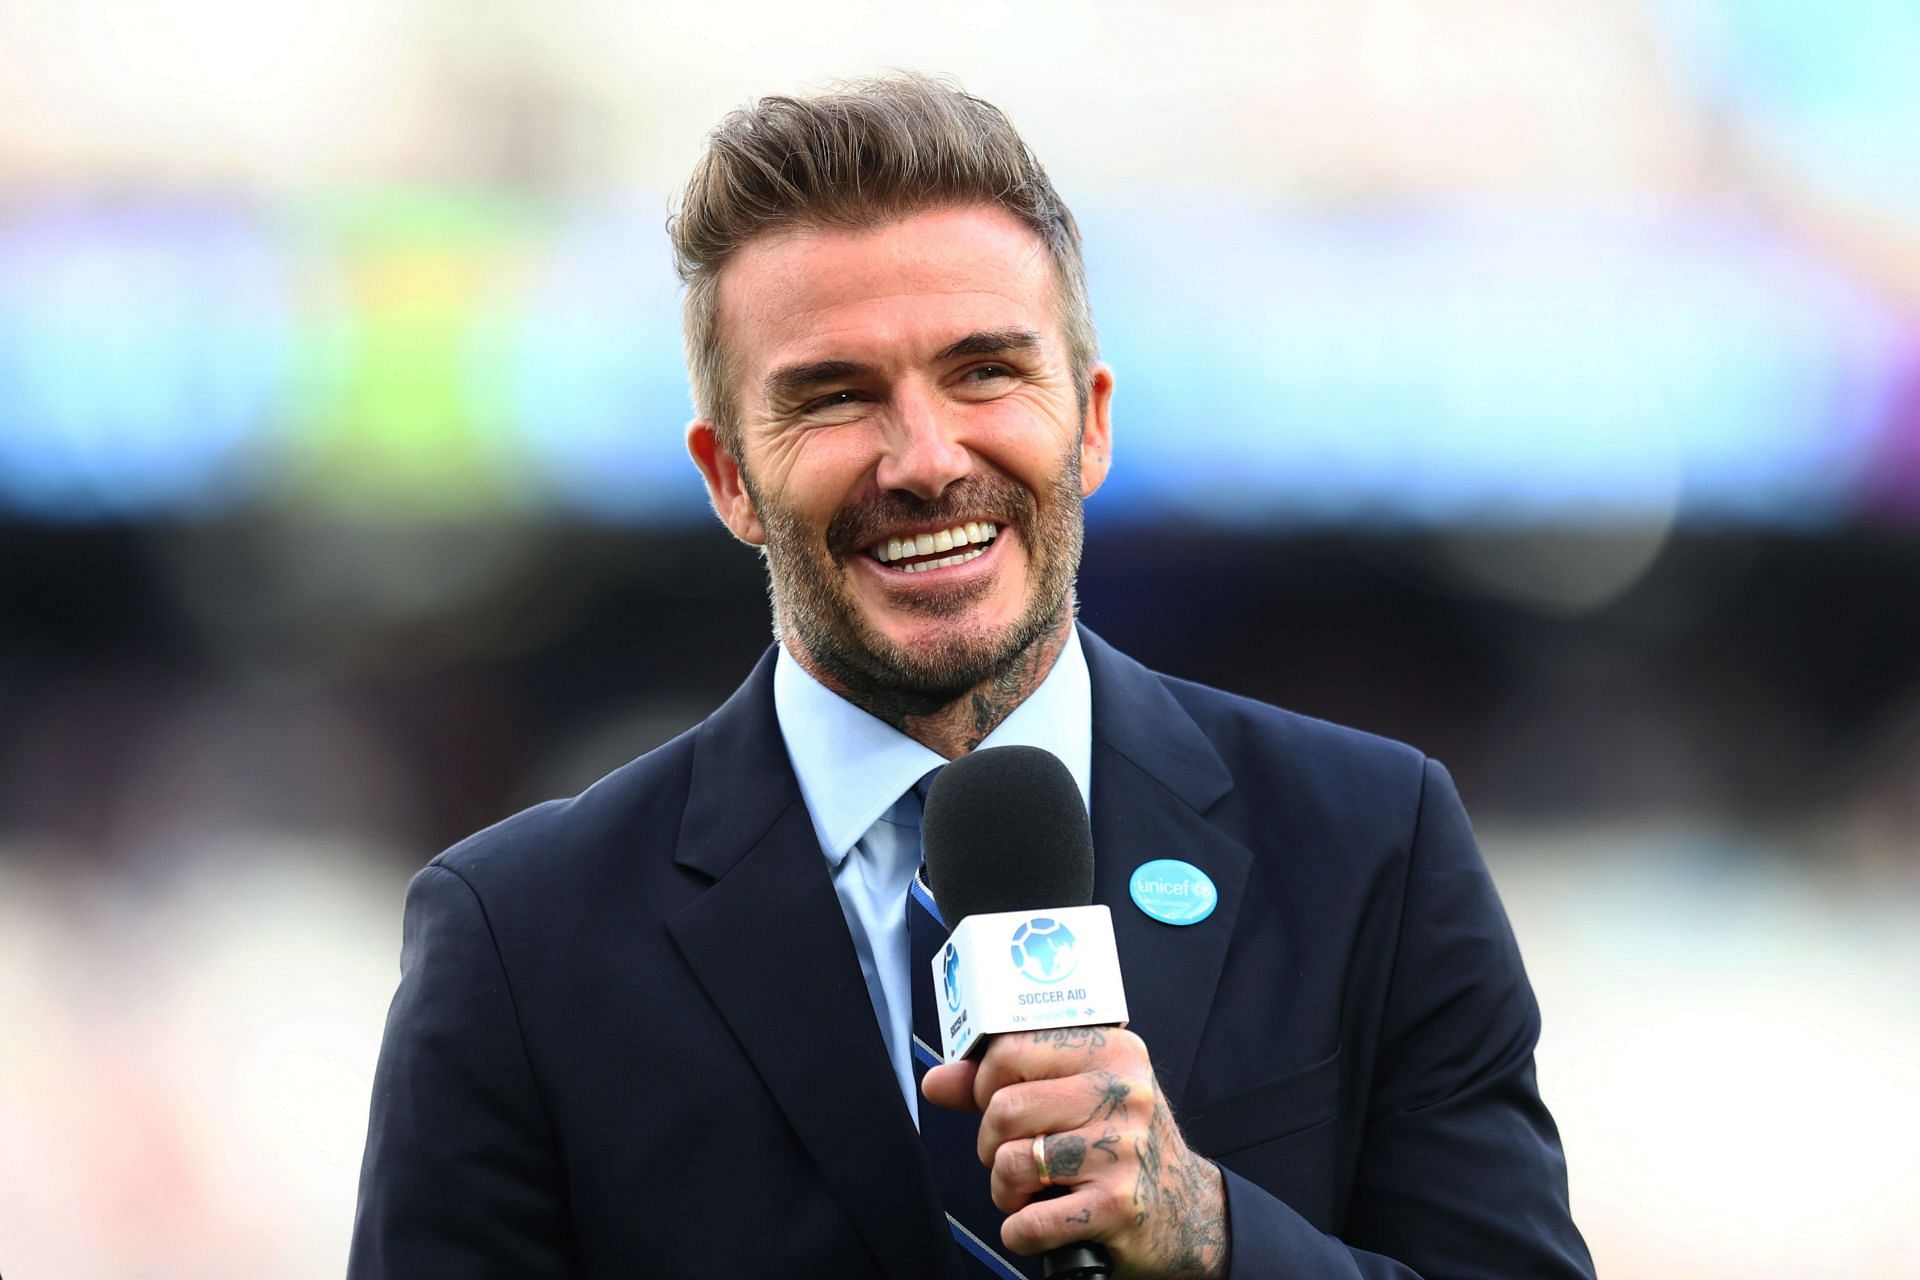 David Beckham has lured one of the greats to DRV PNK.